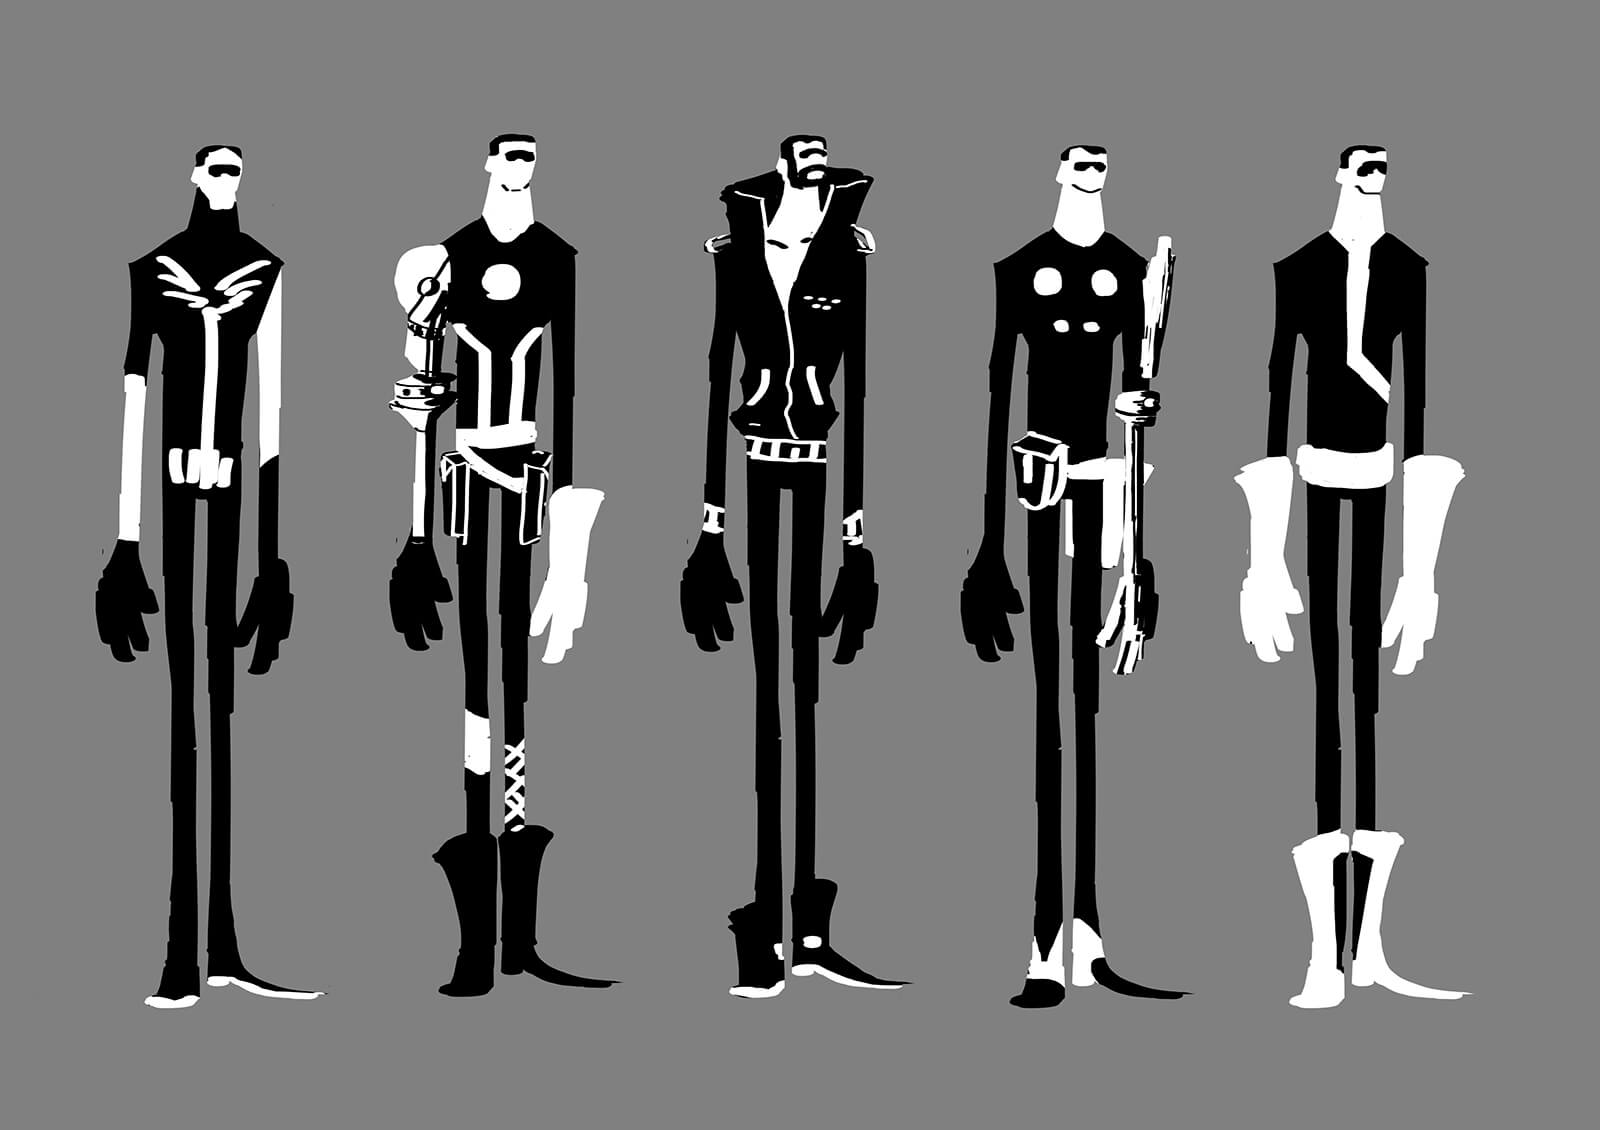 Black-and-white concept sketches or a tall, thin man in various futuristic outfits standing side to side